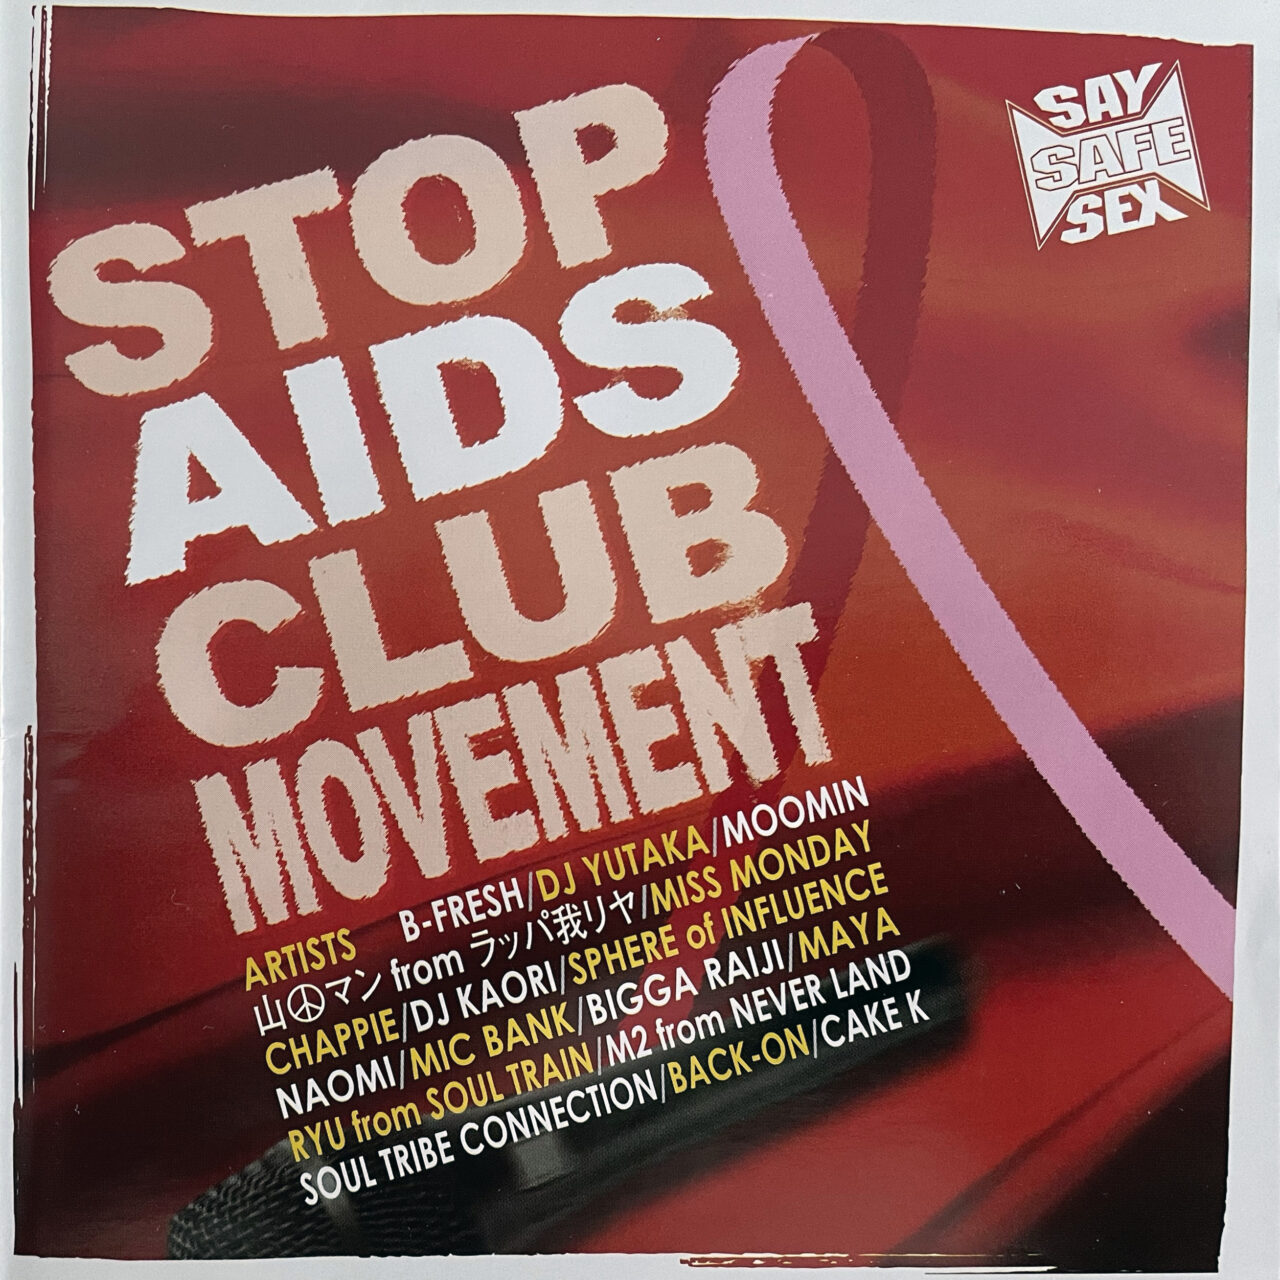 STOP AIDS CLUB MOVEMENT